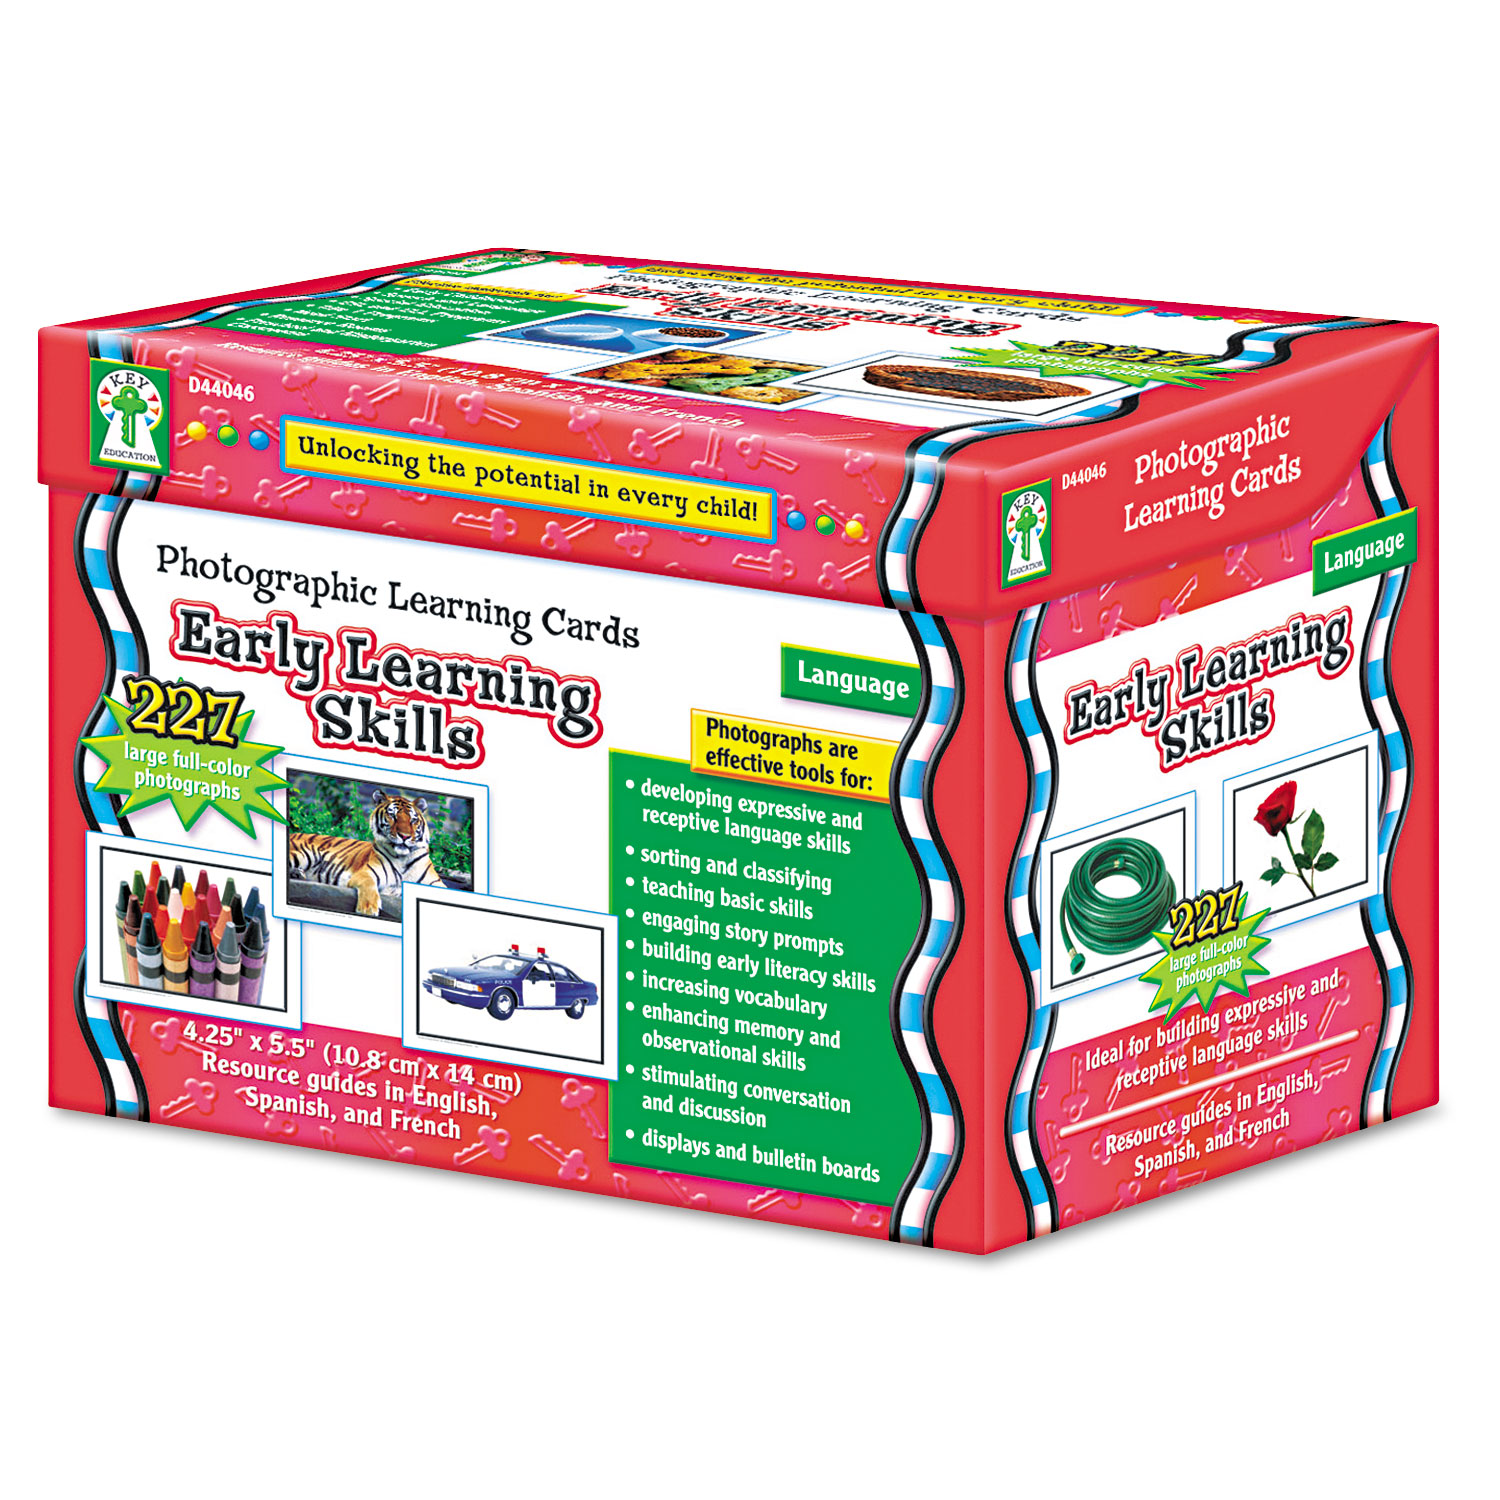  Carson-Dellosa Publishing D44046 Photographic Learning Cards Boxed Set, Early Learning Skills, Grades K-5 (CDPD44046) 